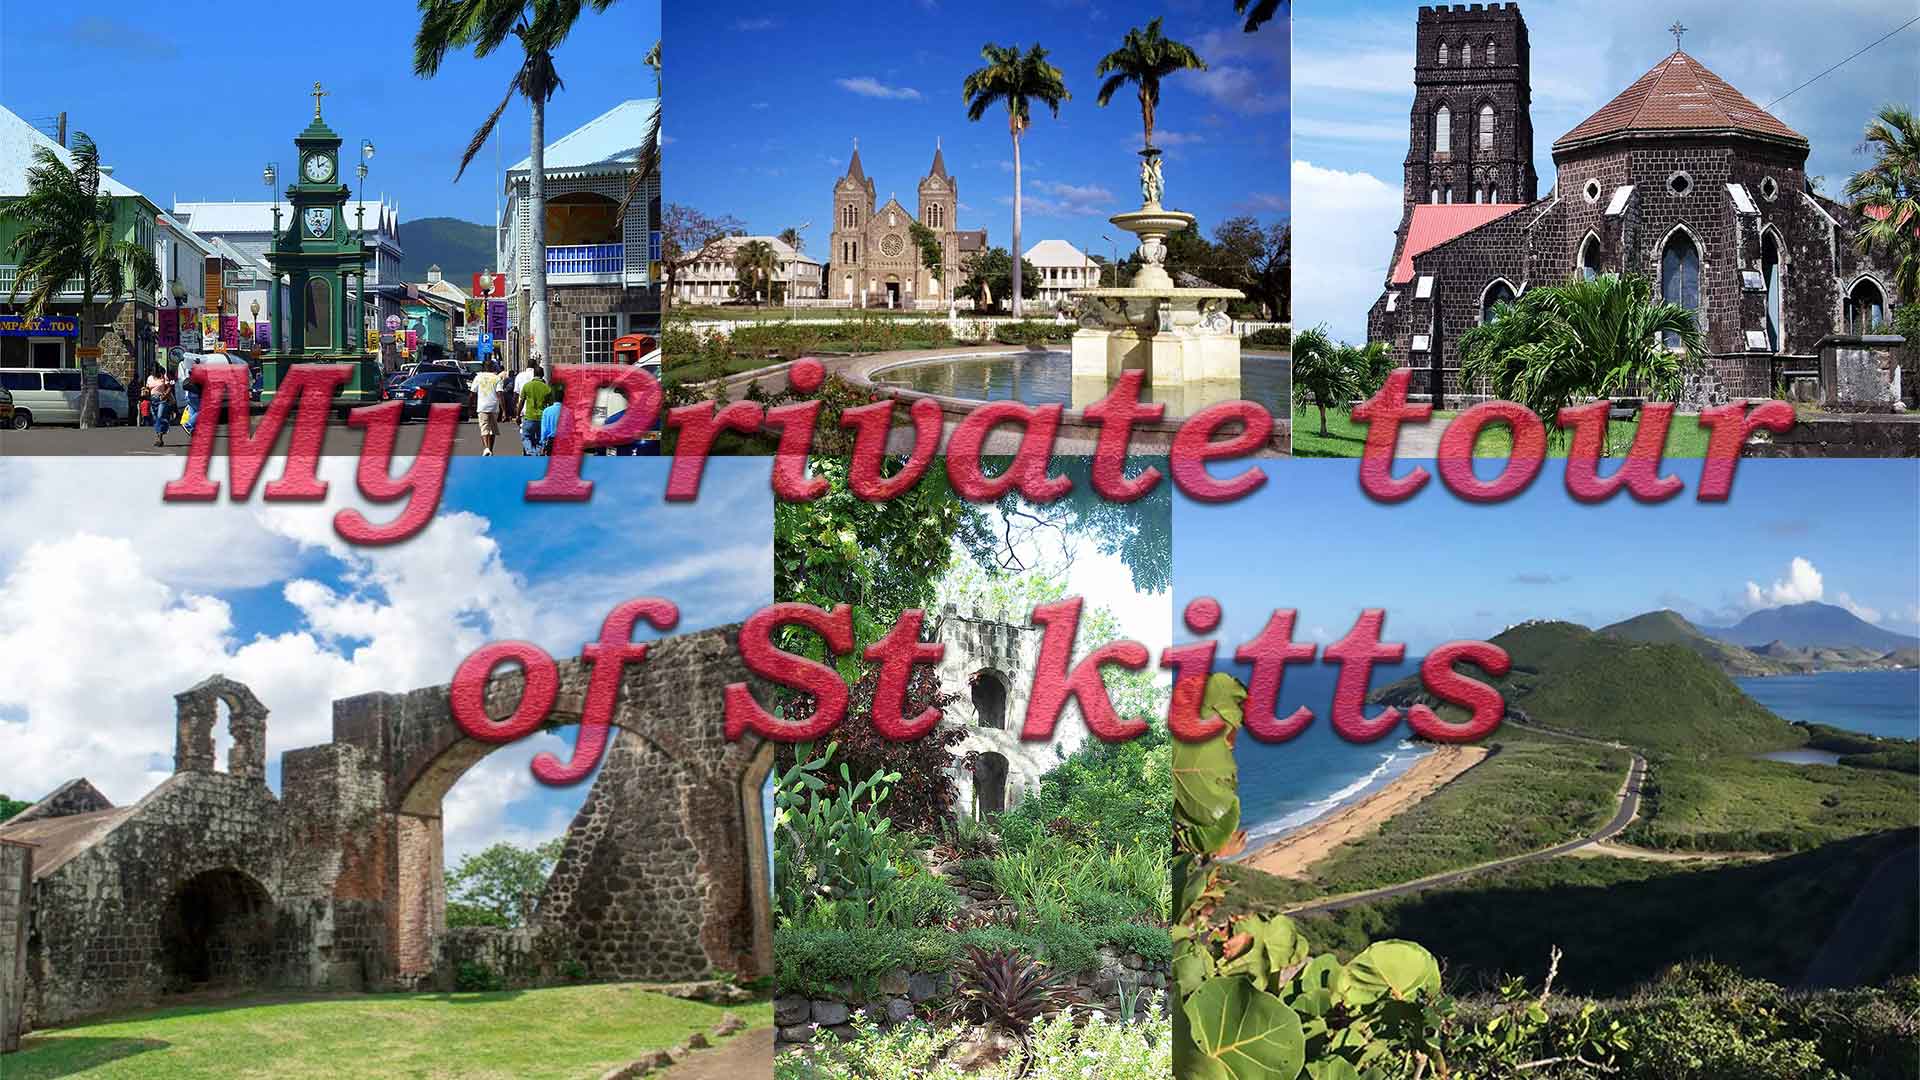 Private tour of St Kitts